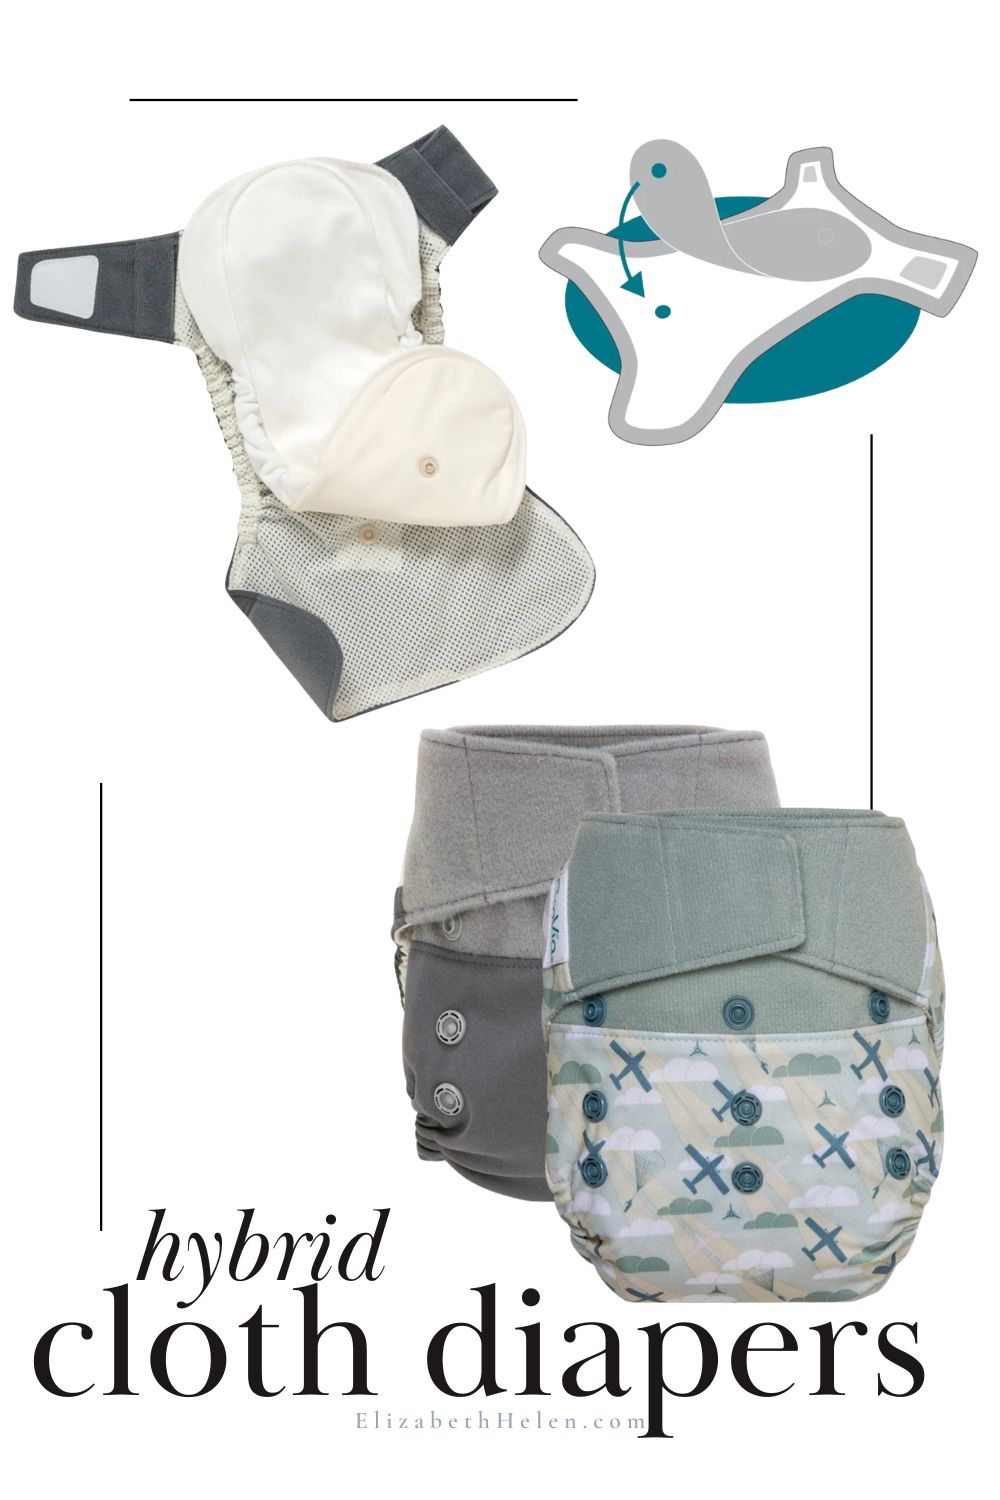 examples of hybrid Grovia diapers and an image of how the hybrid works